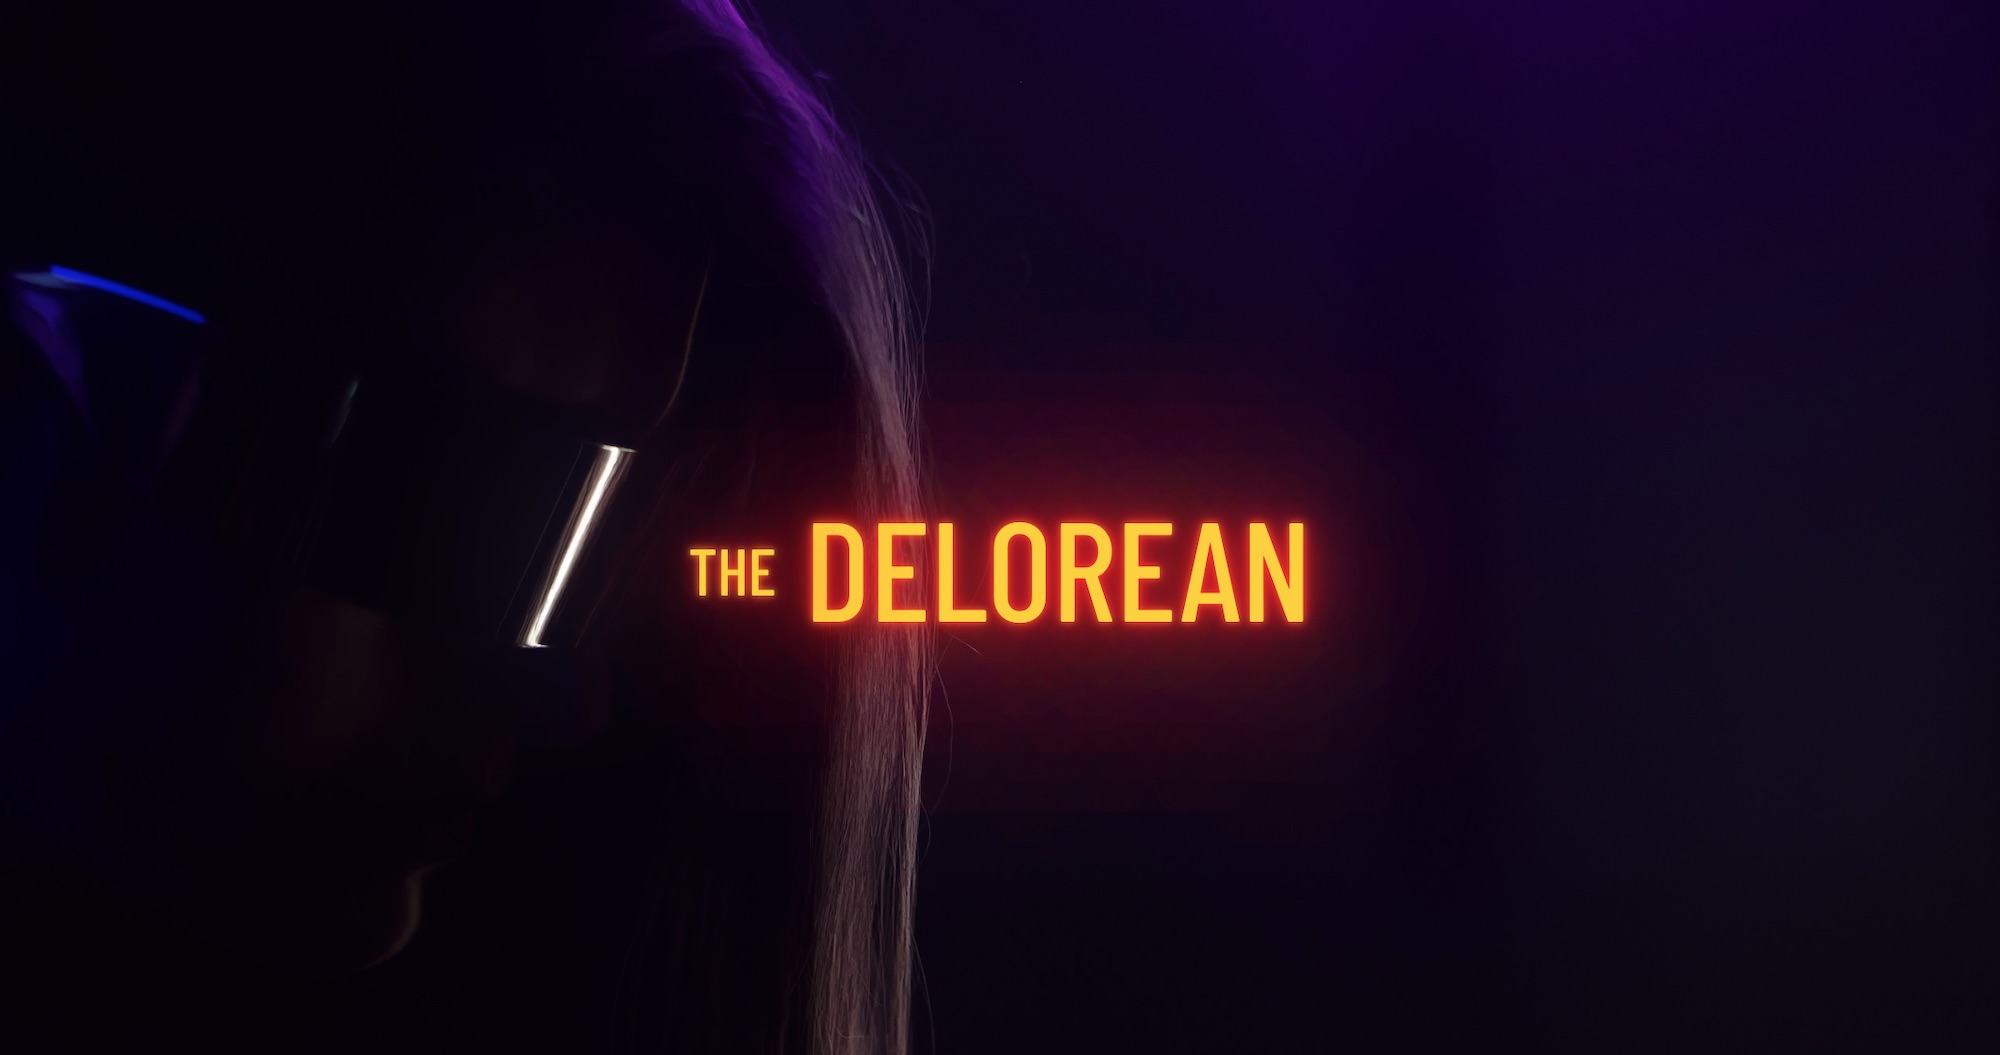 Orange The Delorian title with background showing woman wearing shades in semi darkness